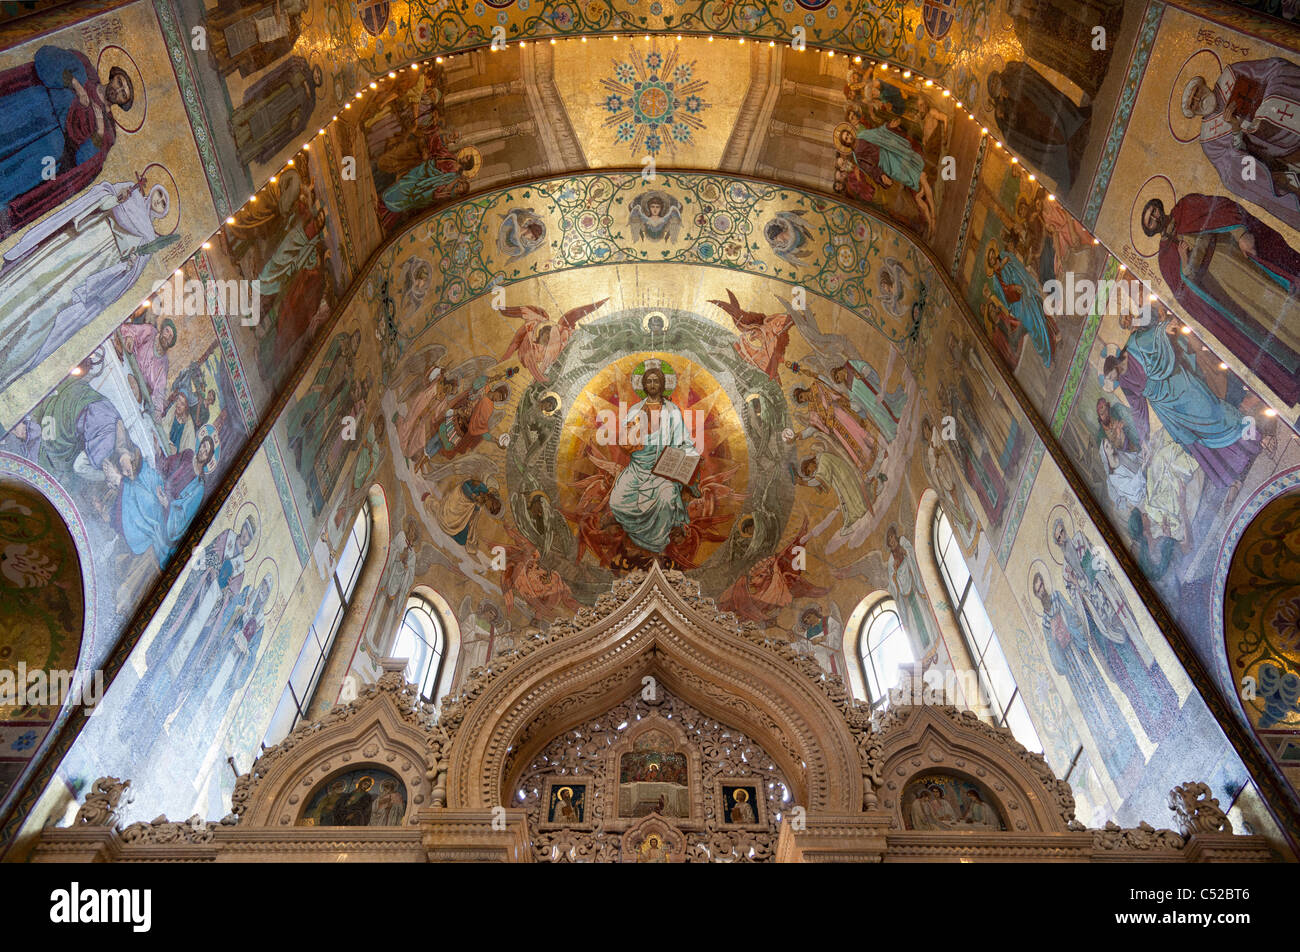 Church of the spilt blood, St Petersburg Russia - interior 4 Stock Photo